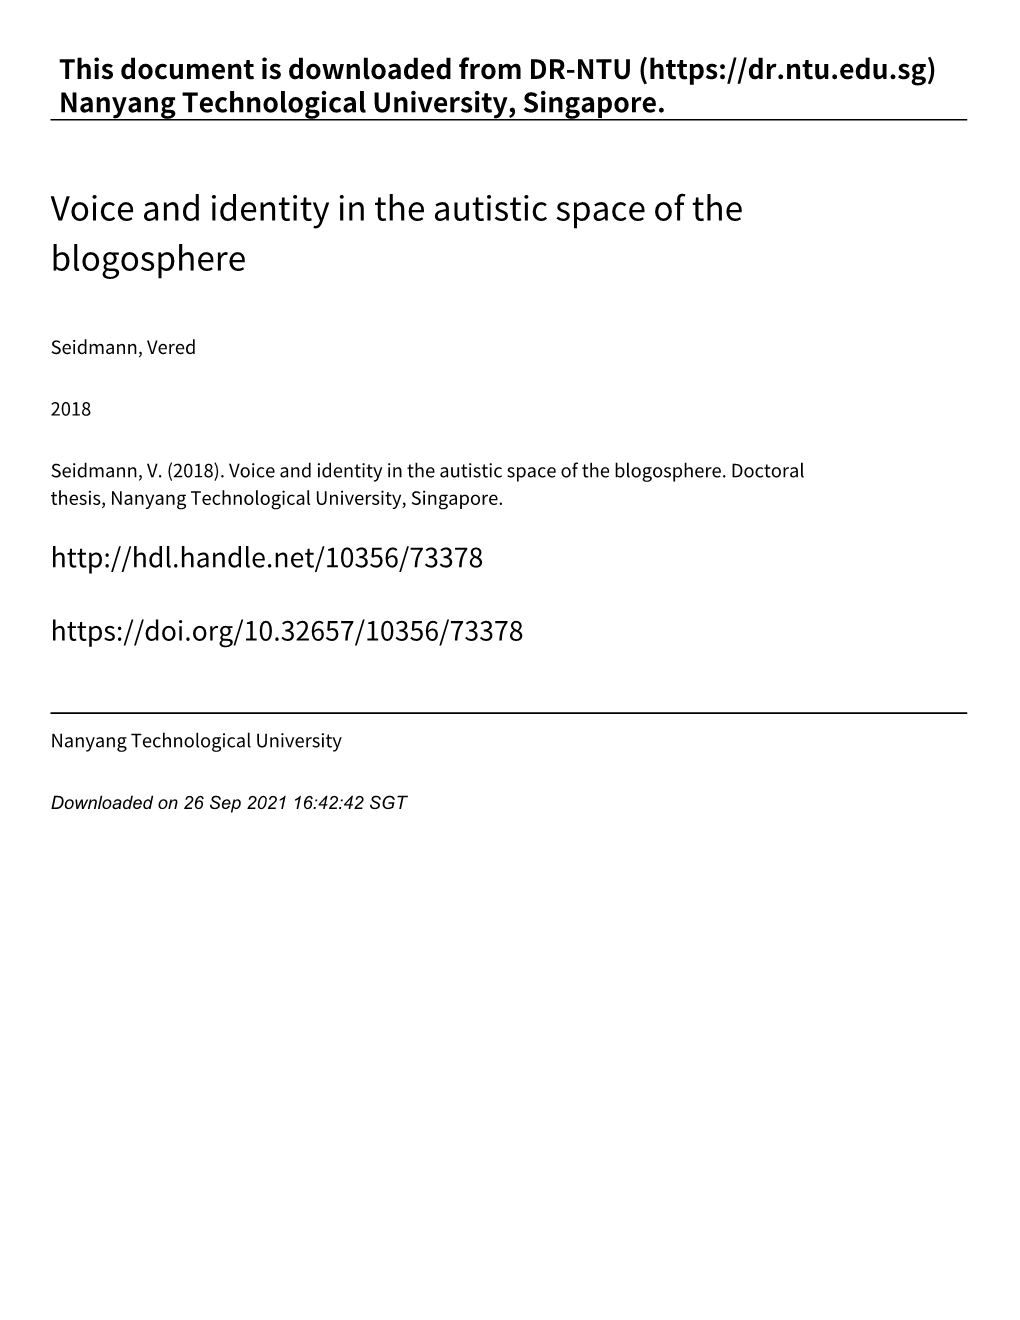 Voice and Identity in the Autistic Space of the Blogosphere